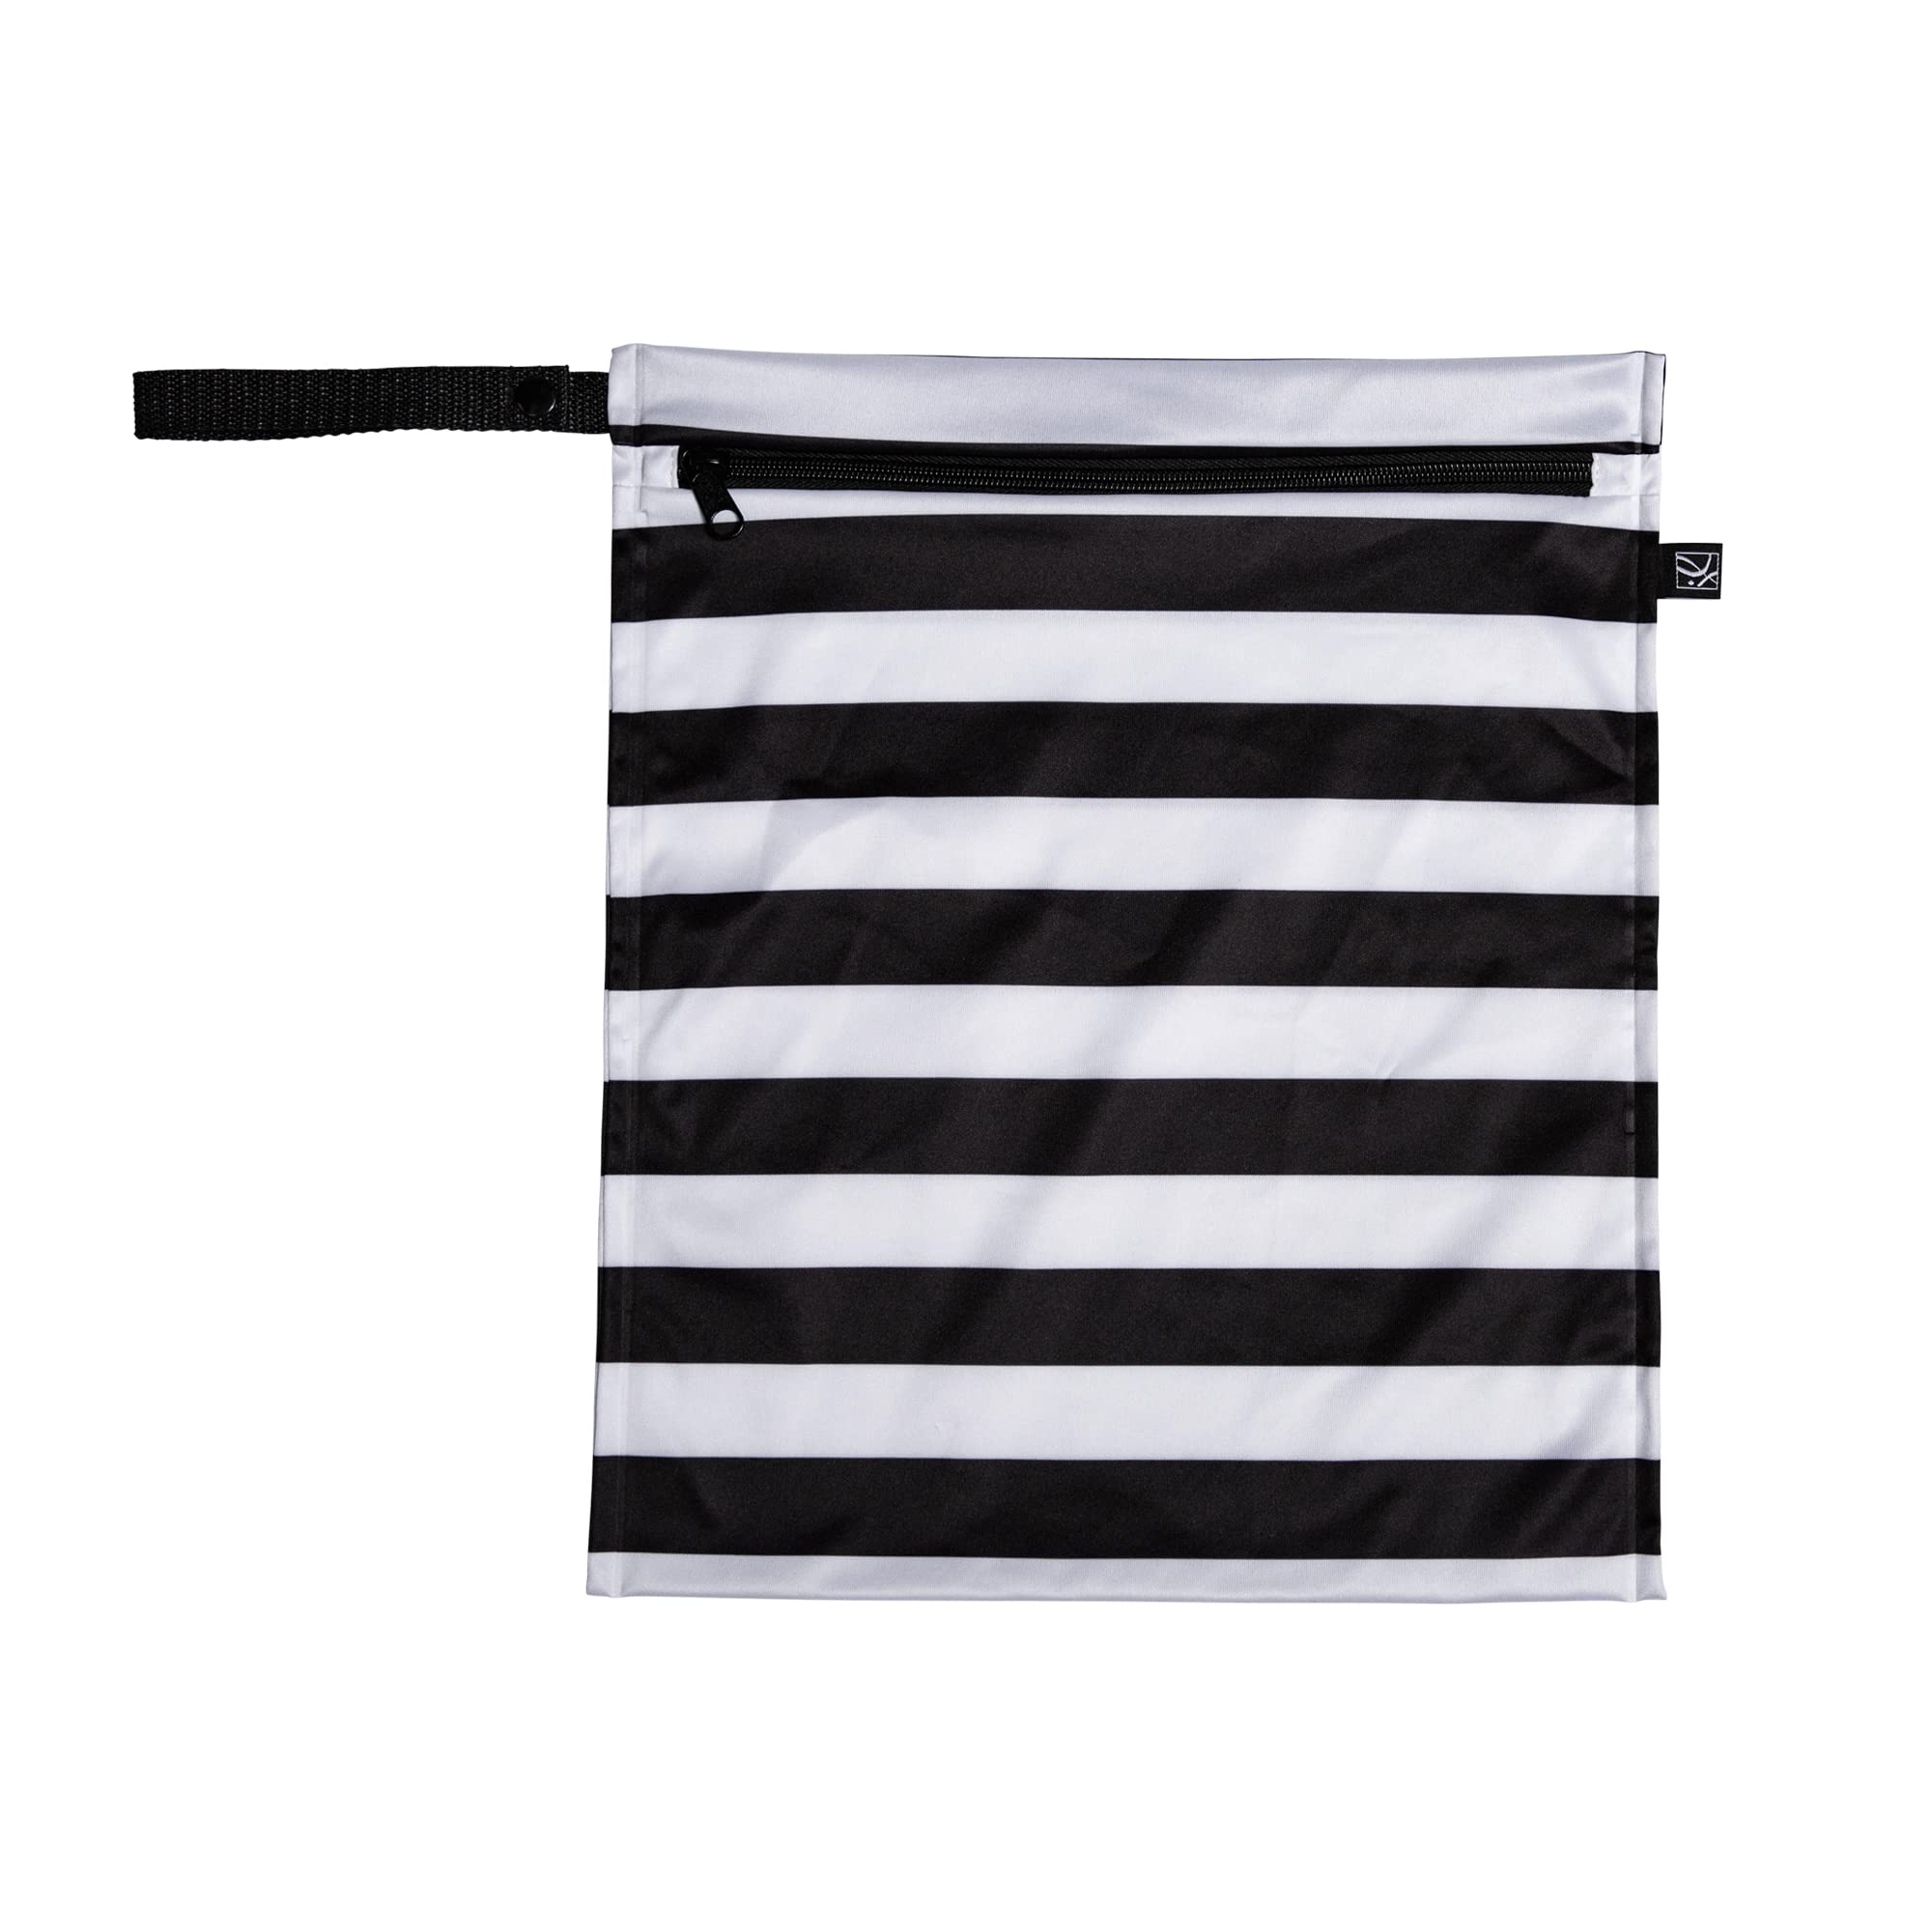 J.L. Childress Wet-to-Go Portable Wet and Dry Bags, Waterproof and Leakproof, Machine-Washable, Reusable for Cloth Diapers, Wet Clothes, Swimsuits, and More. 2 Pack, Black/White Stripe (1162)